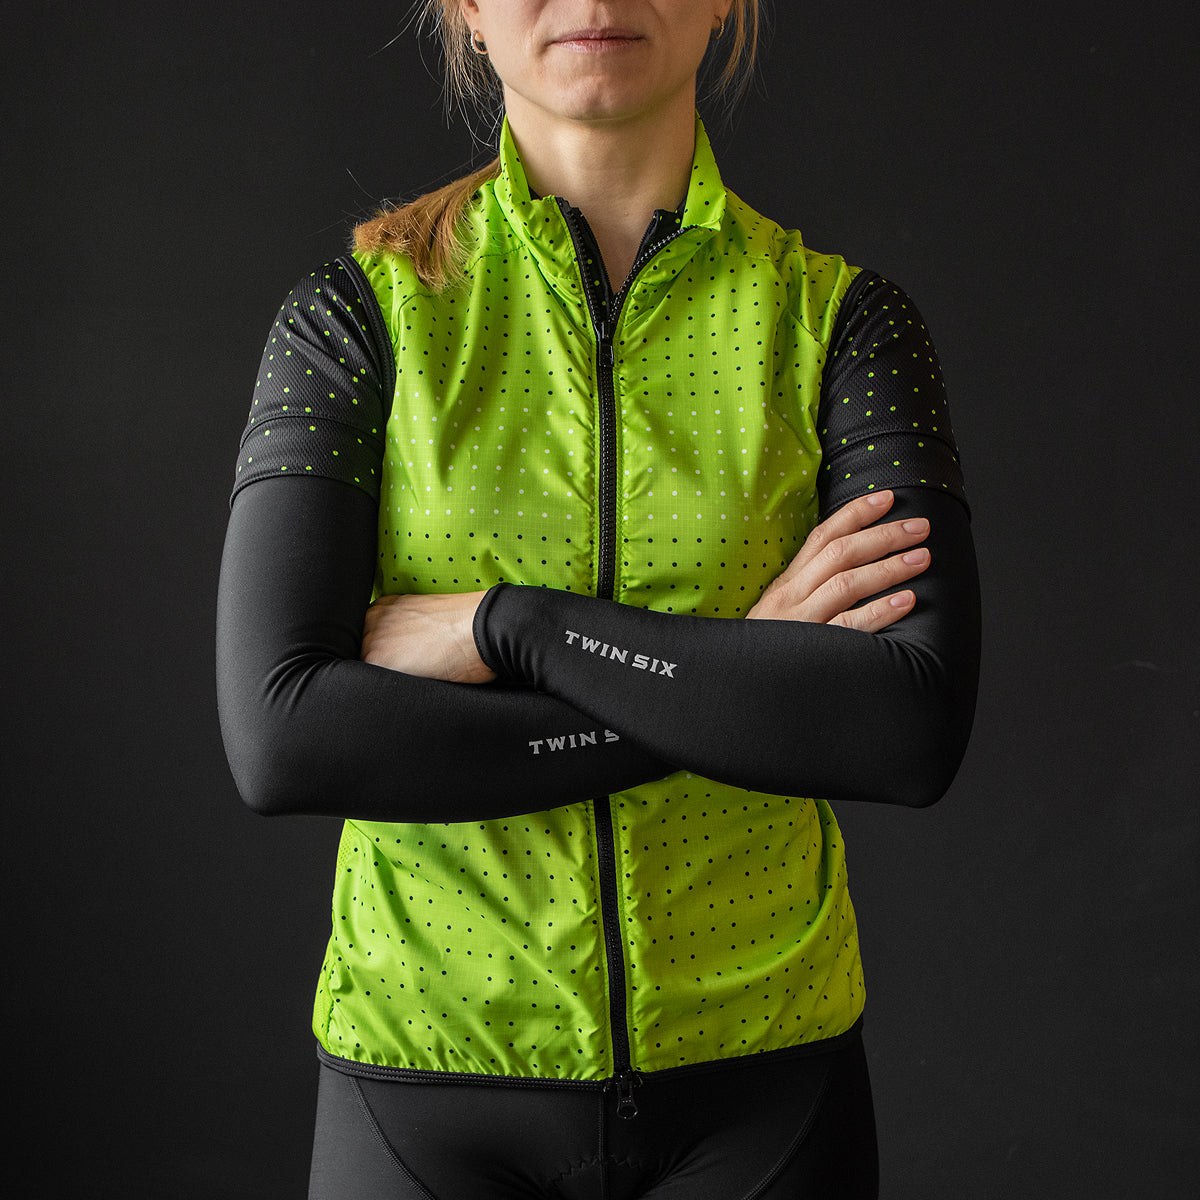 Thermal Arm Warmers